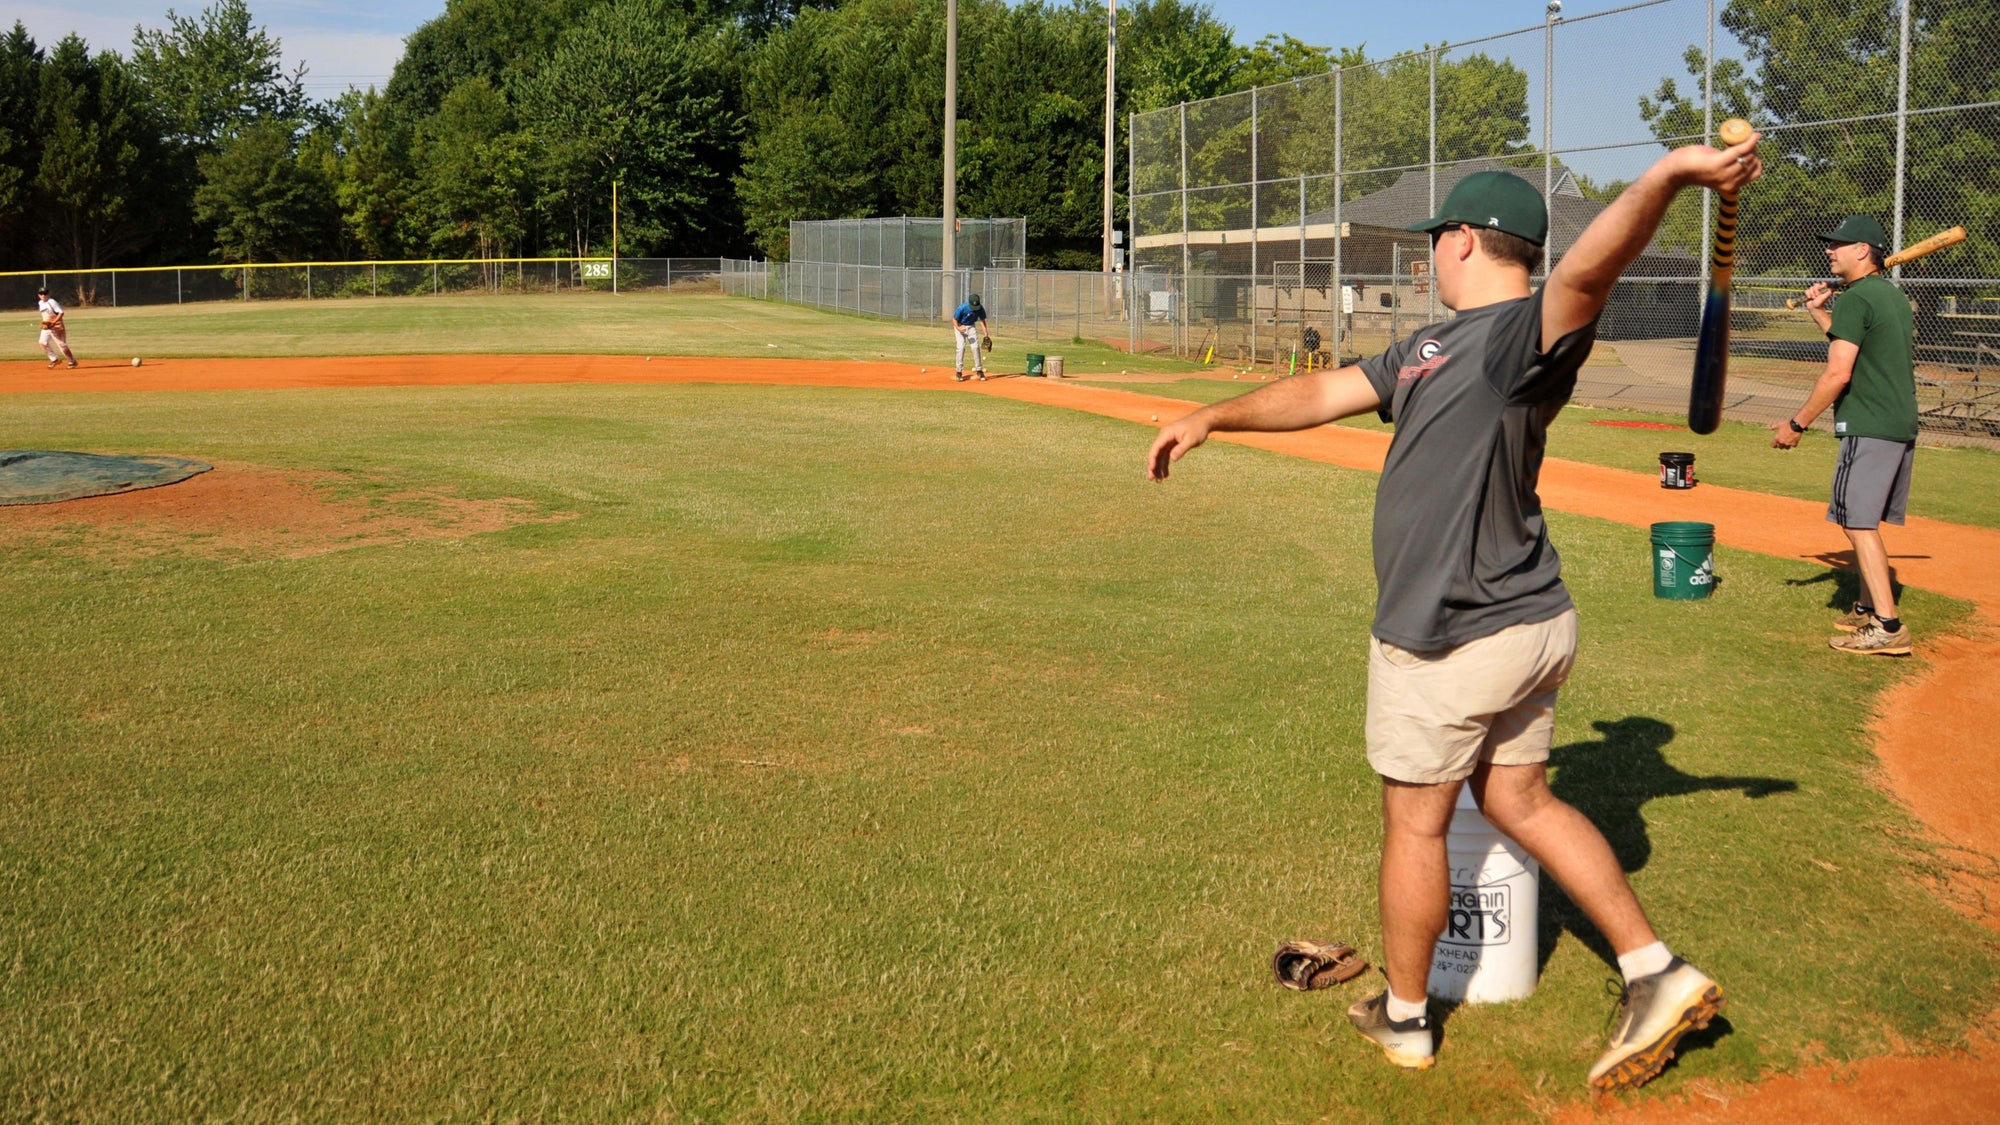 Top 10 Reasons for Coaches to Utilize MaxBP - Defensive/ Base Running Drills